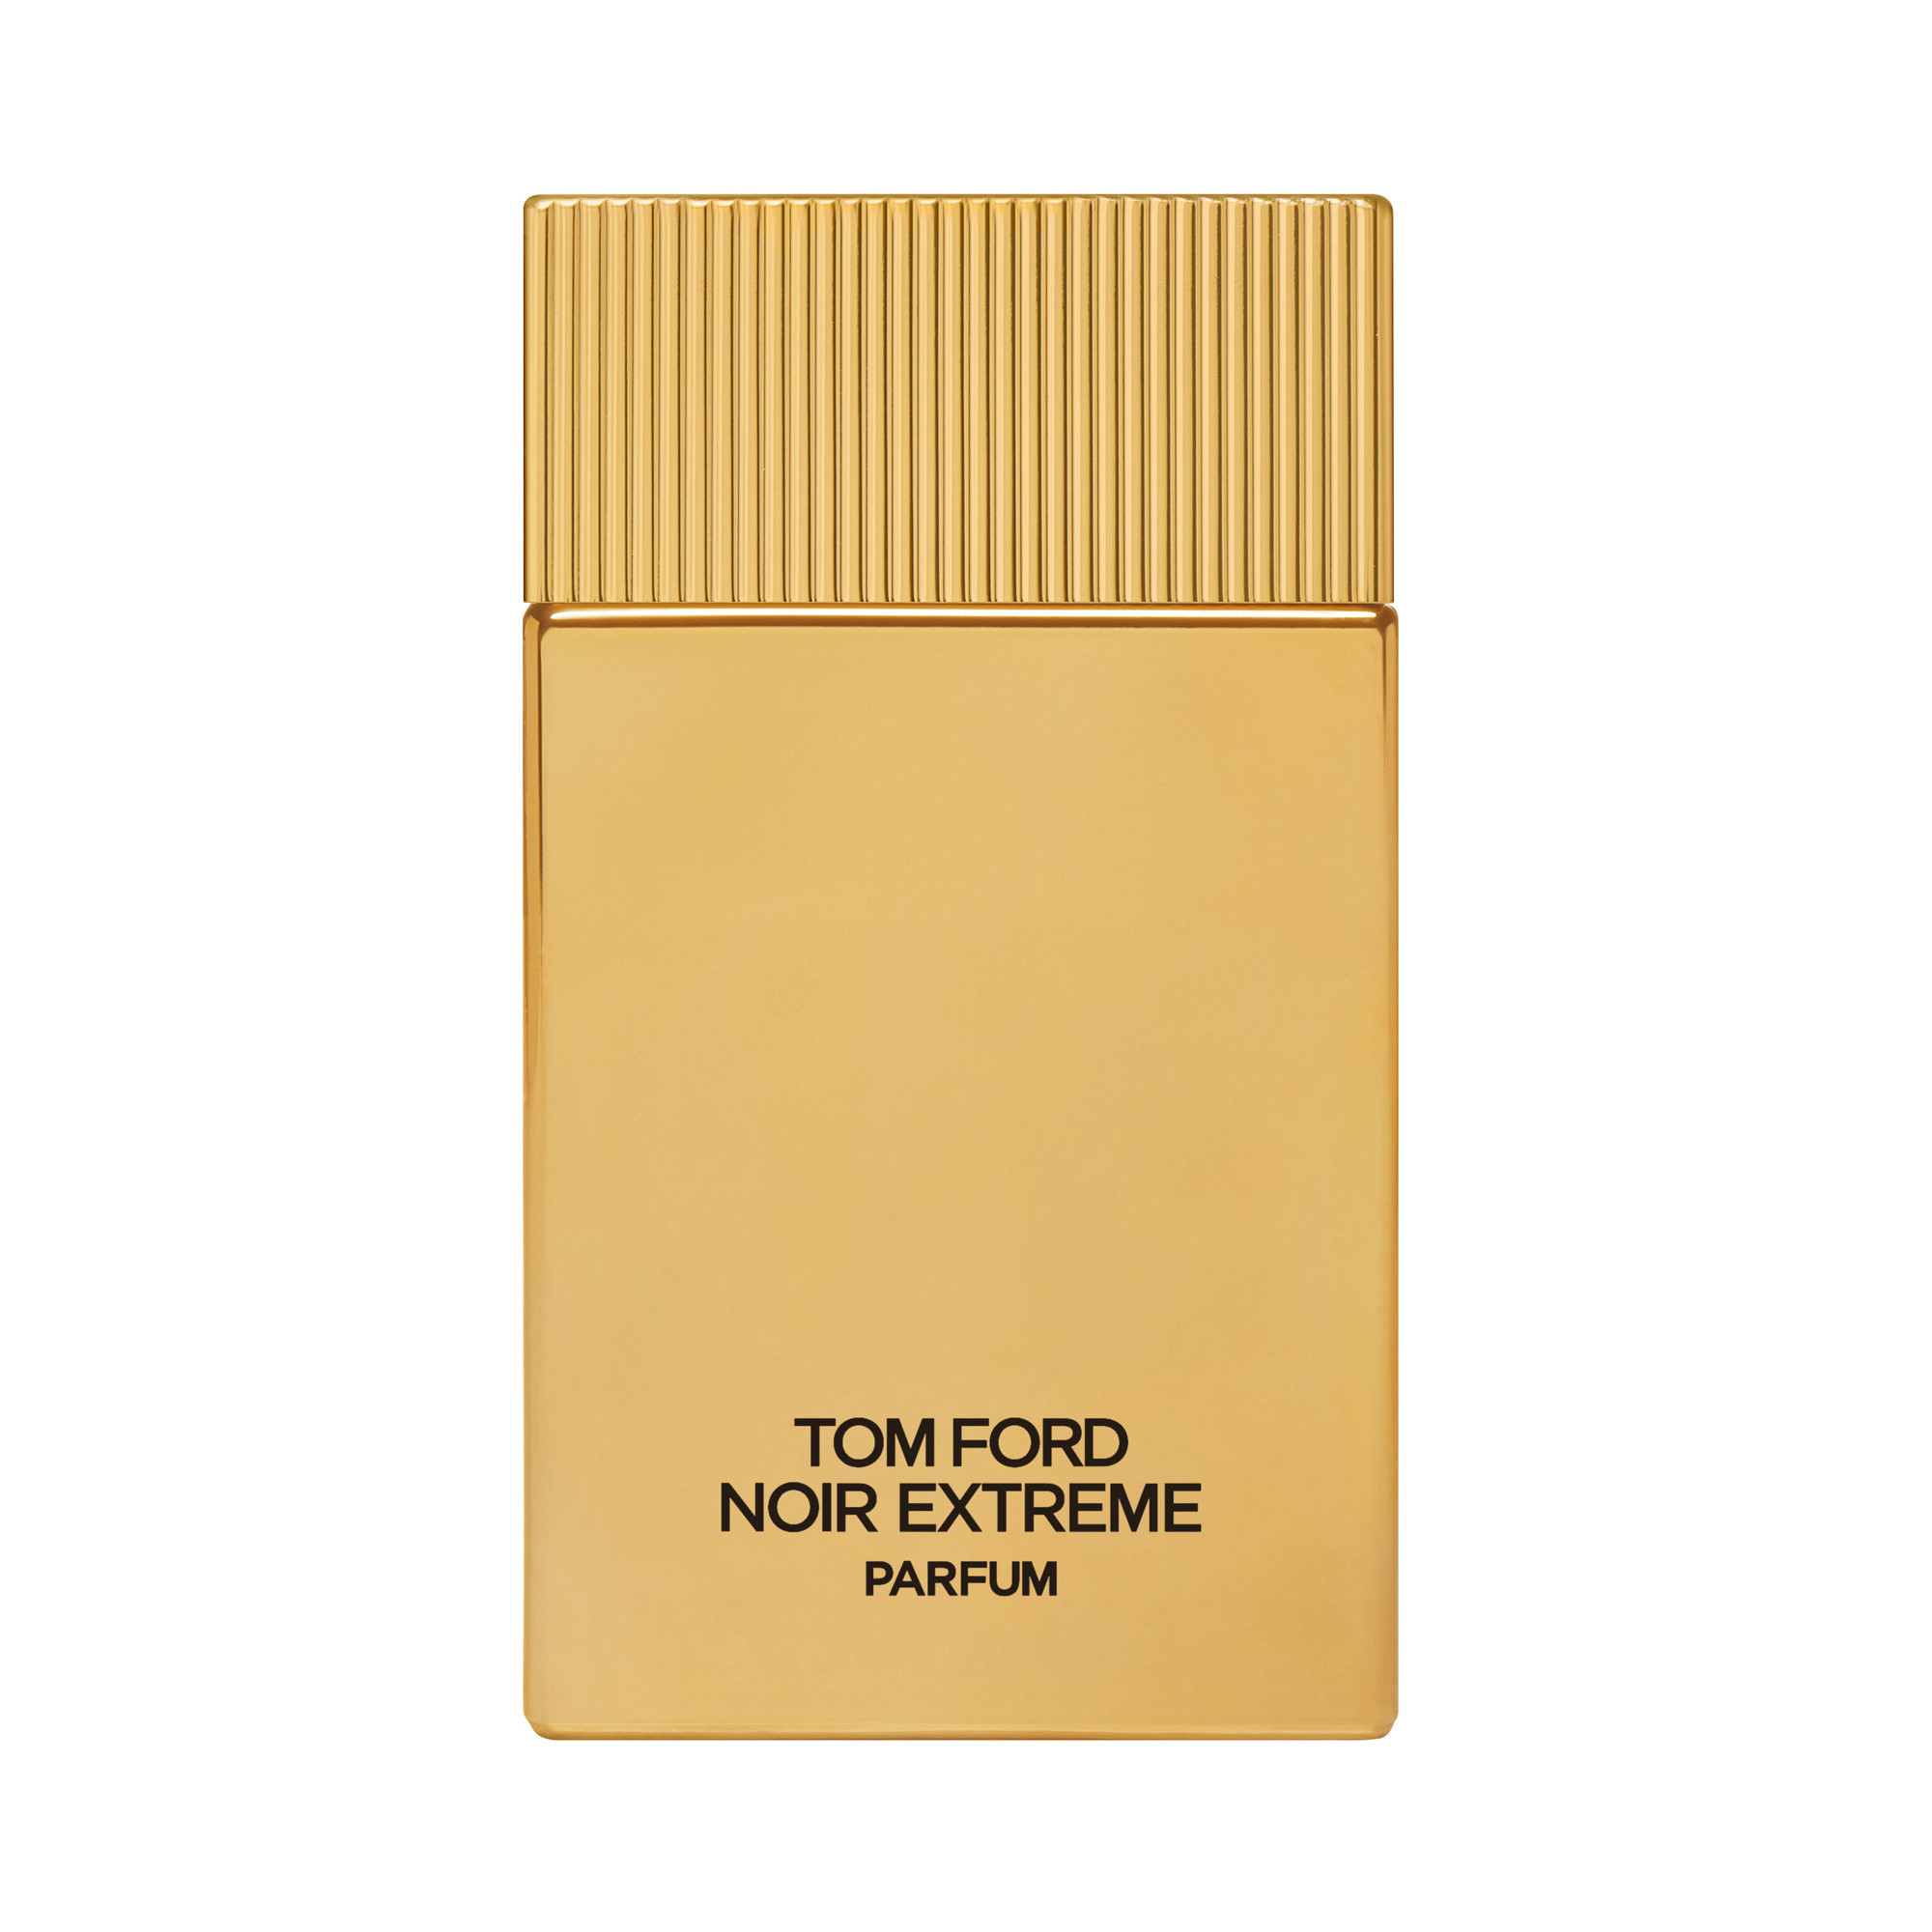 Tom Ford Beauty - Noir Extreme Parfum 100 ml, Golden Yellow, large image number 0